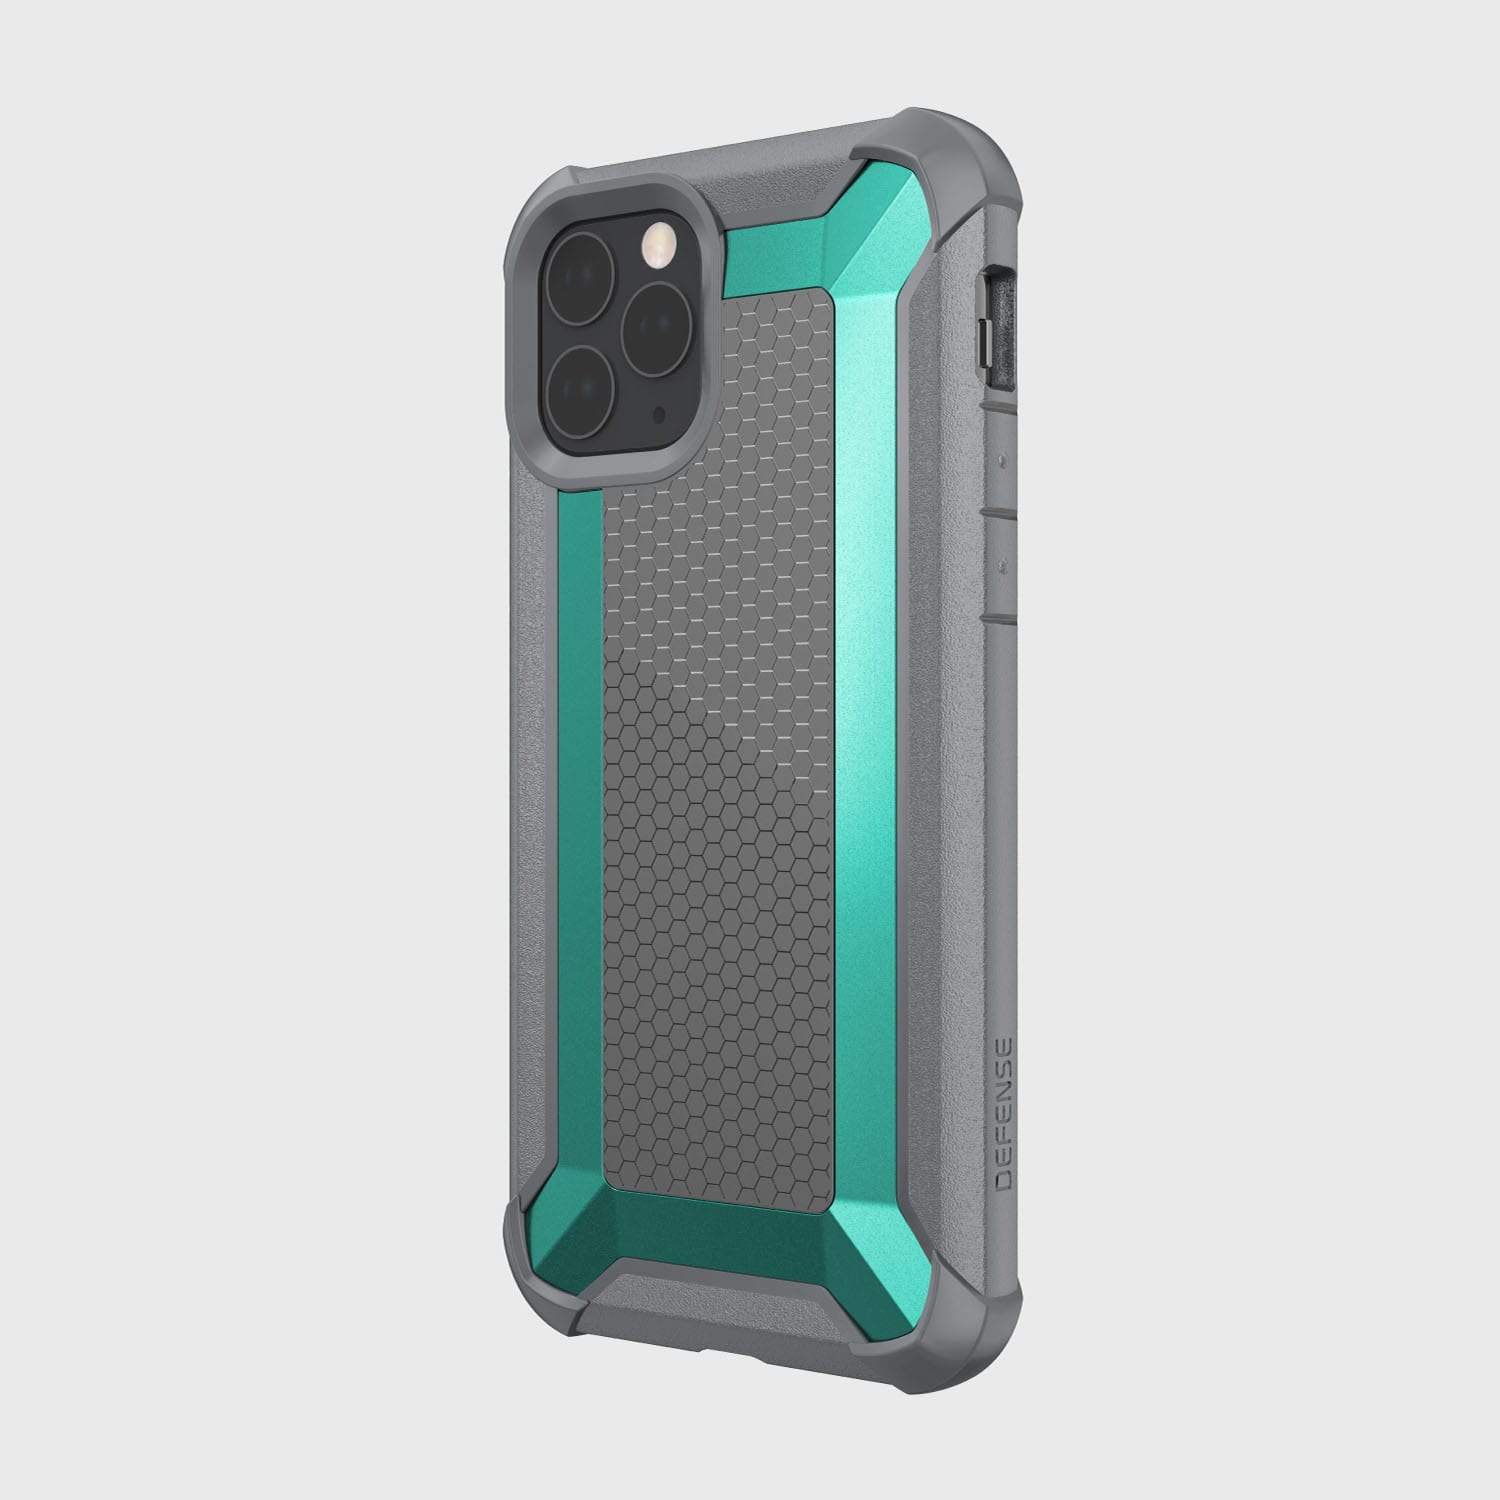 The back view of the Raptic Tactical protective iPhone 11 Pro Max case in grey, featuring a shock-absorbing rubber exterior.